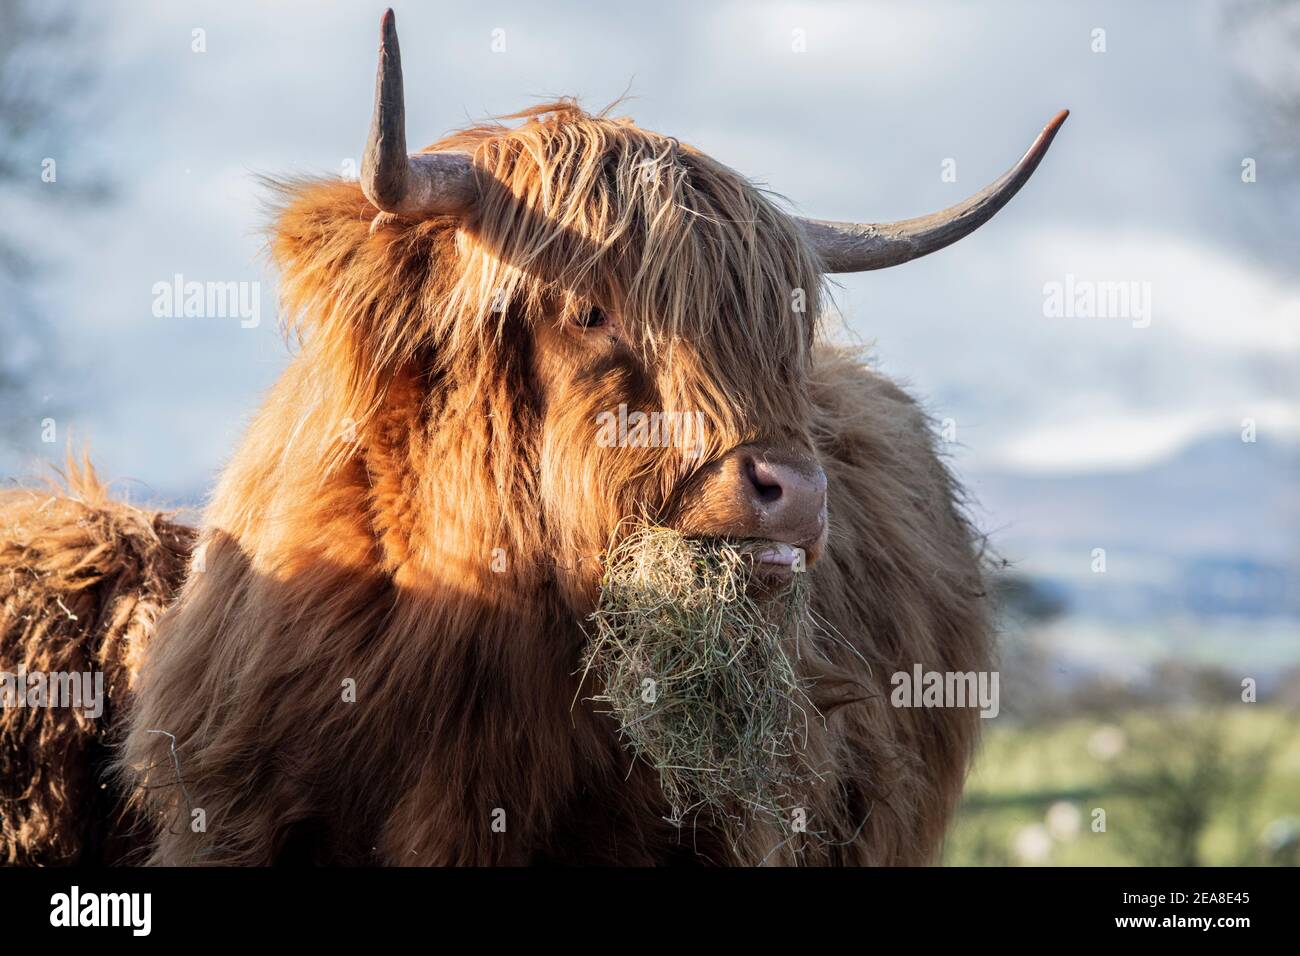 Highland Cattle eating grass Stock Photo